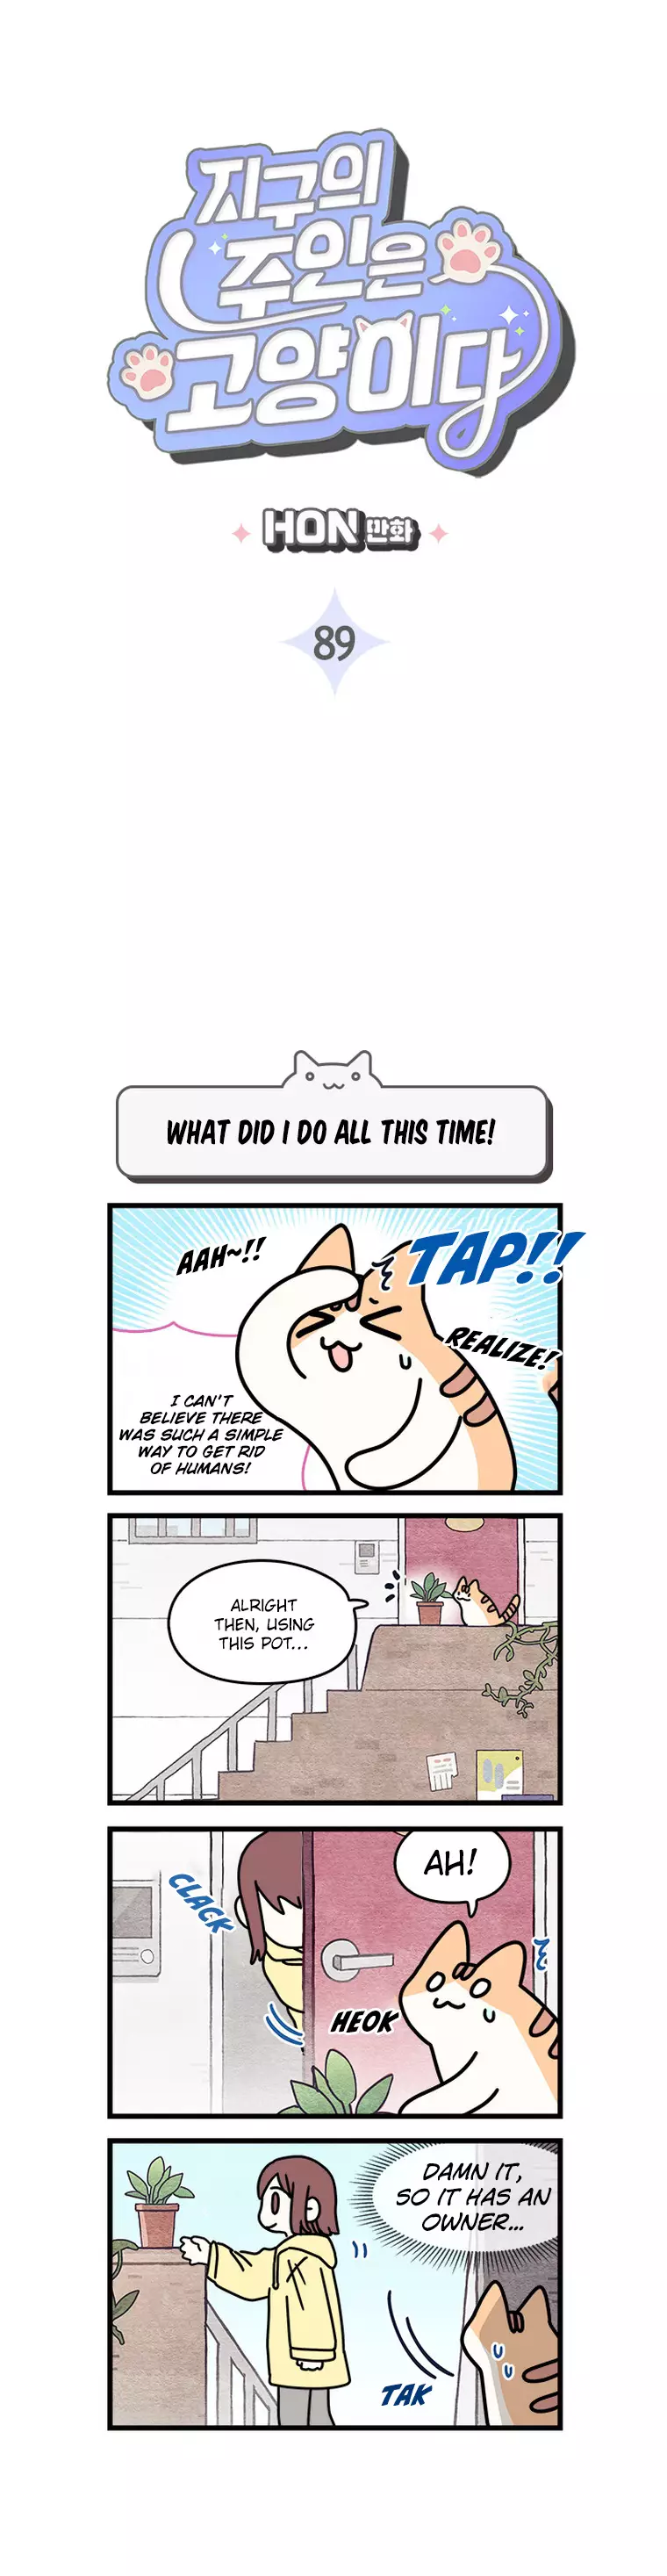 Cats Own The World - 89 page 3-6f1c1611